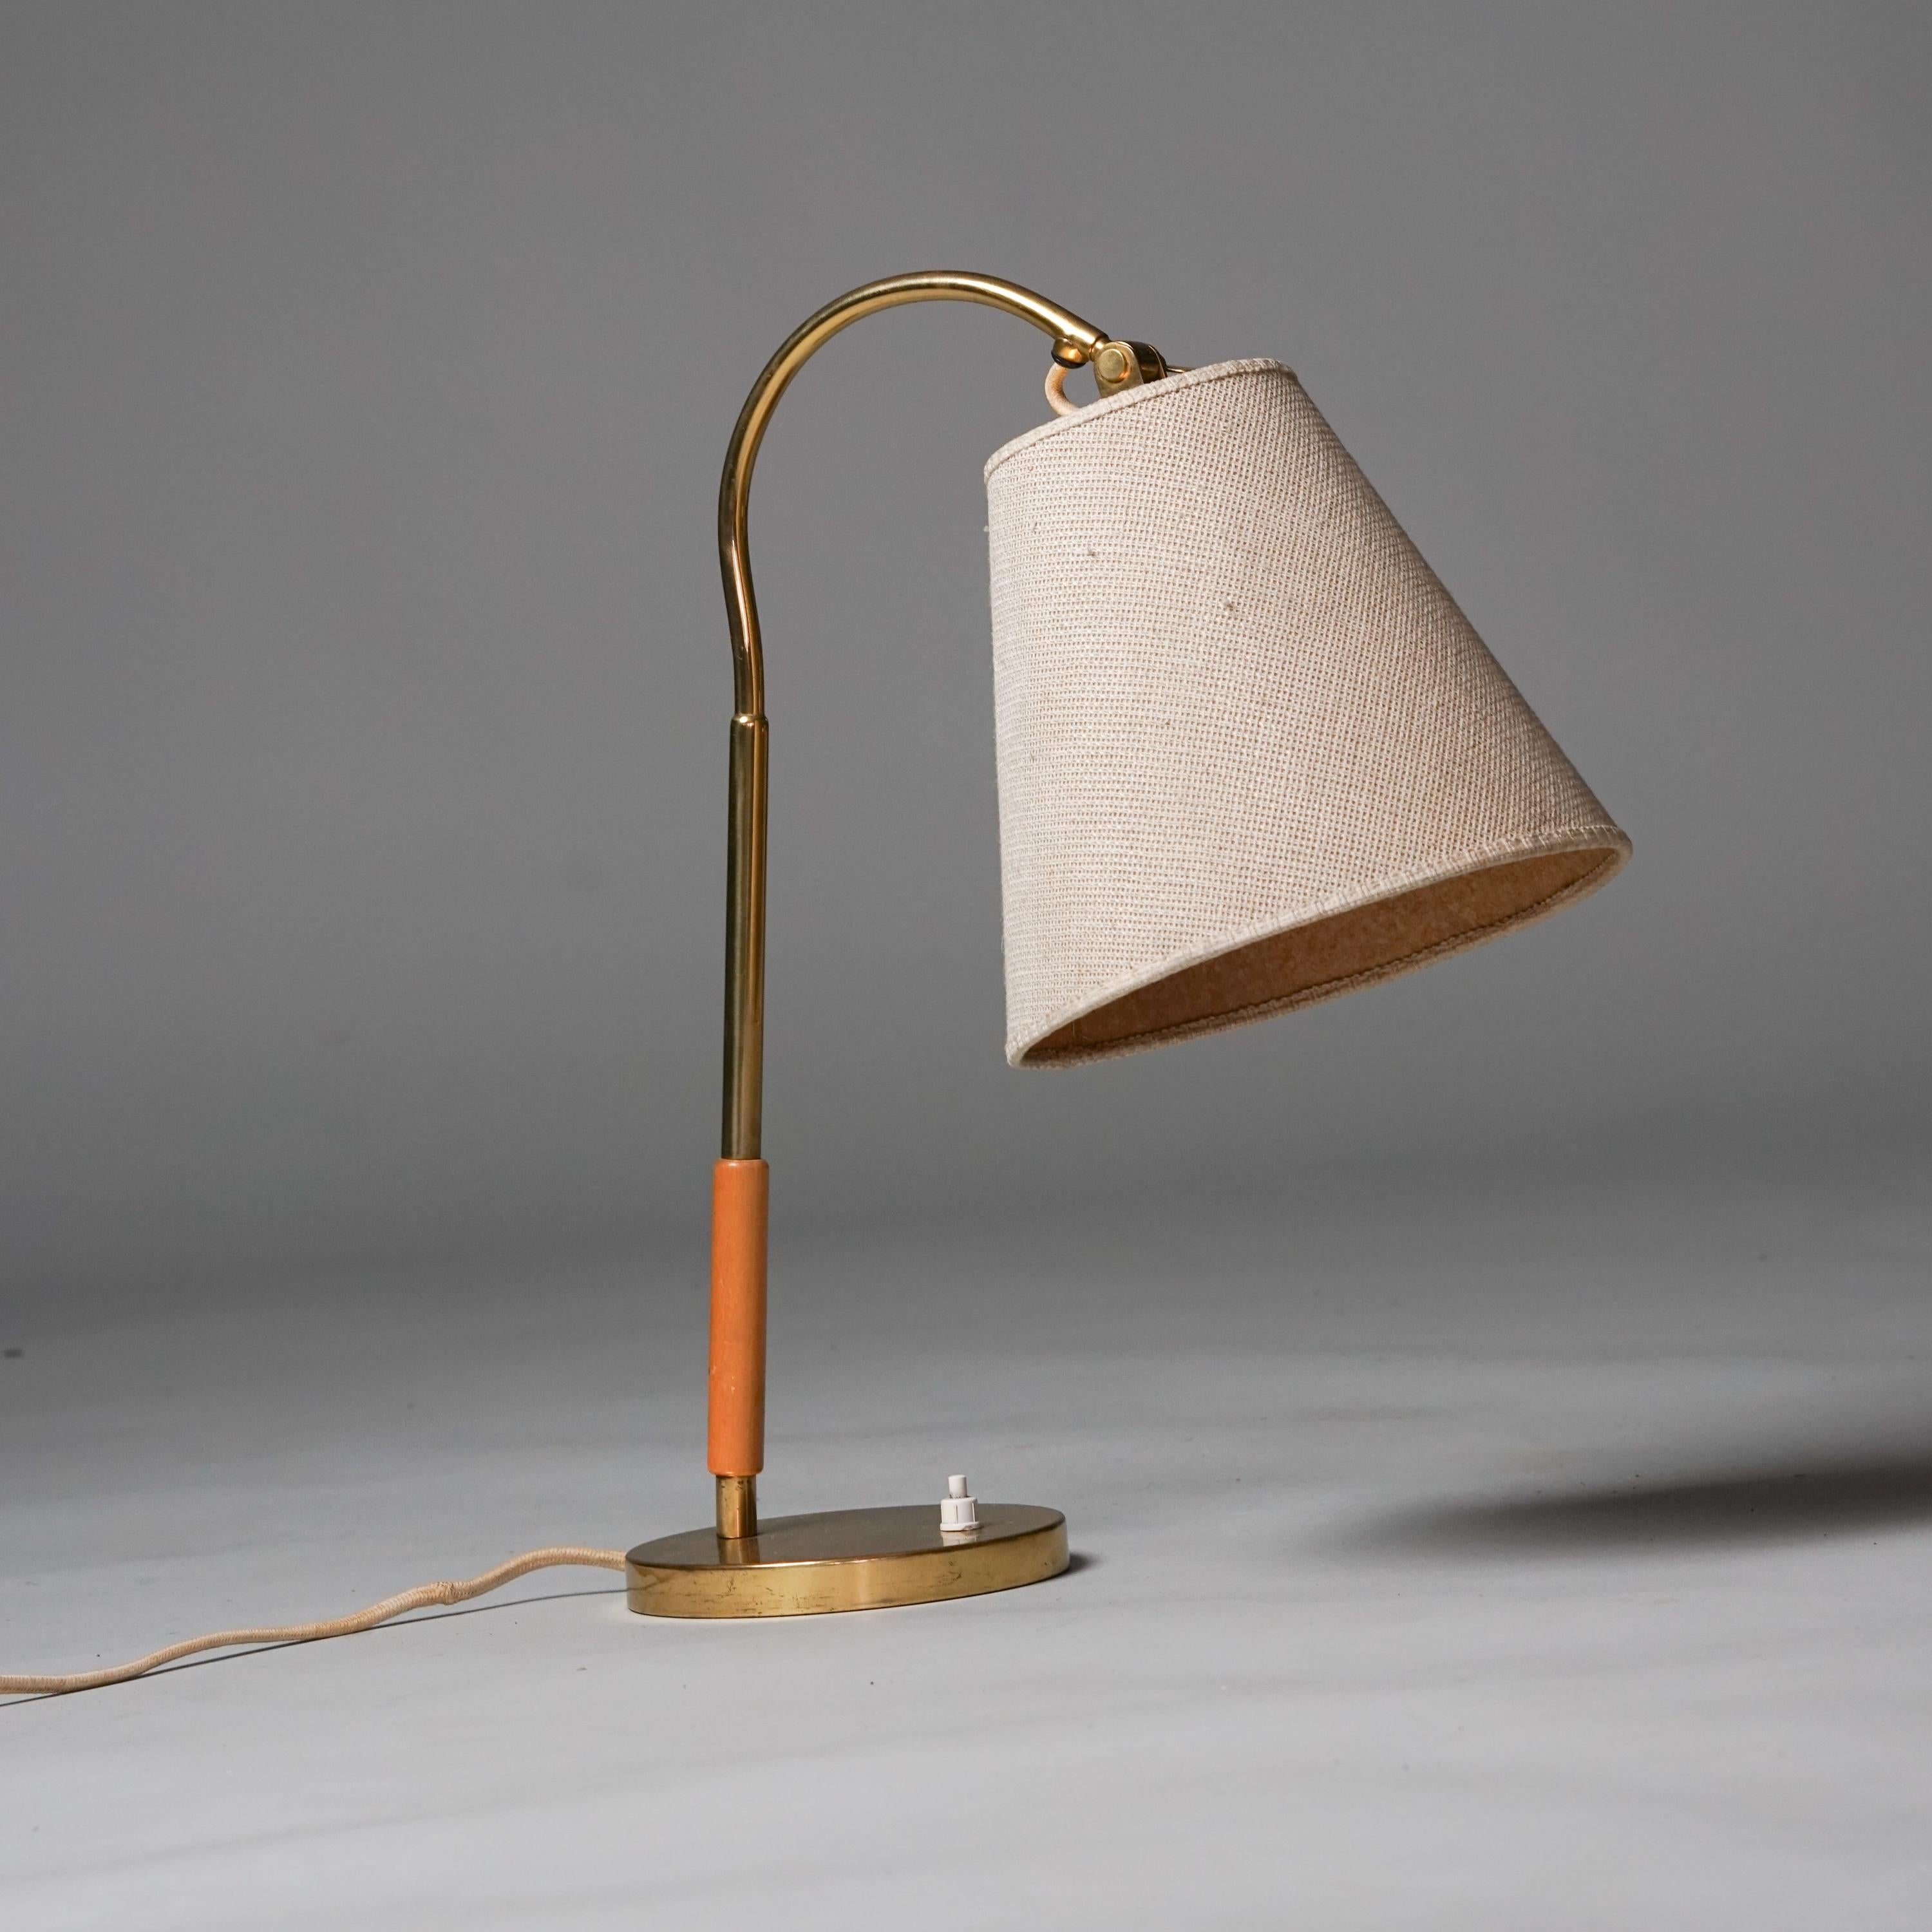 Scandinavian Modern Model 9201 Table Lamp, Paavo Tynell, Taito Oy, 1940/1950s For Sale